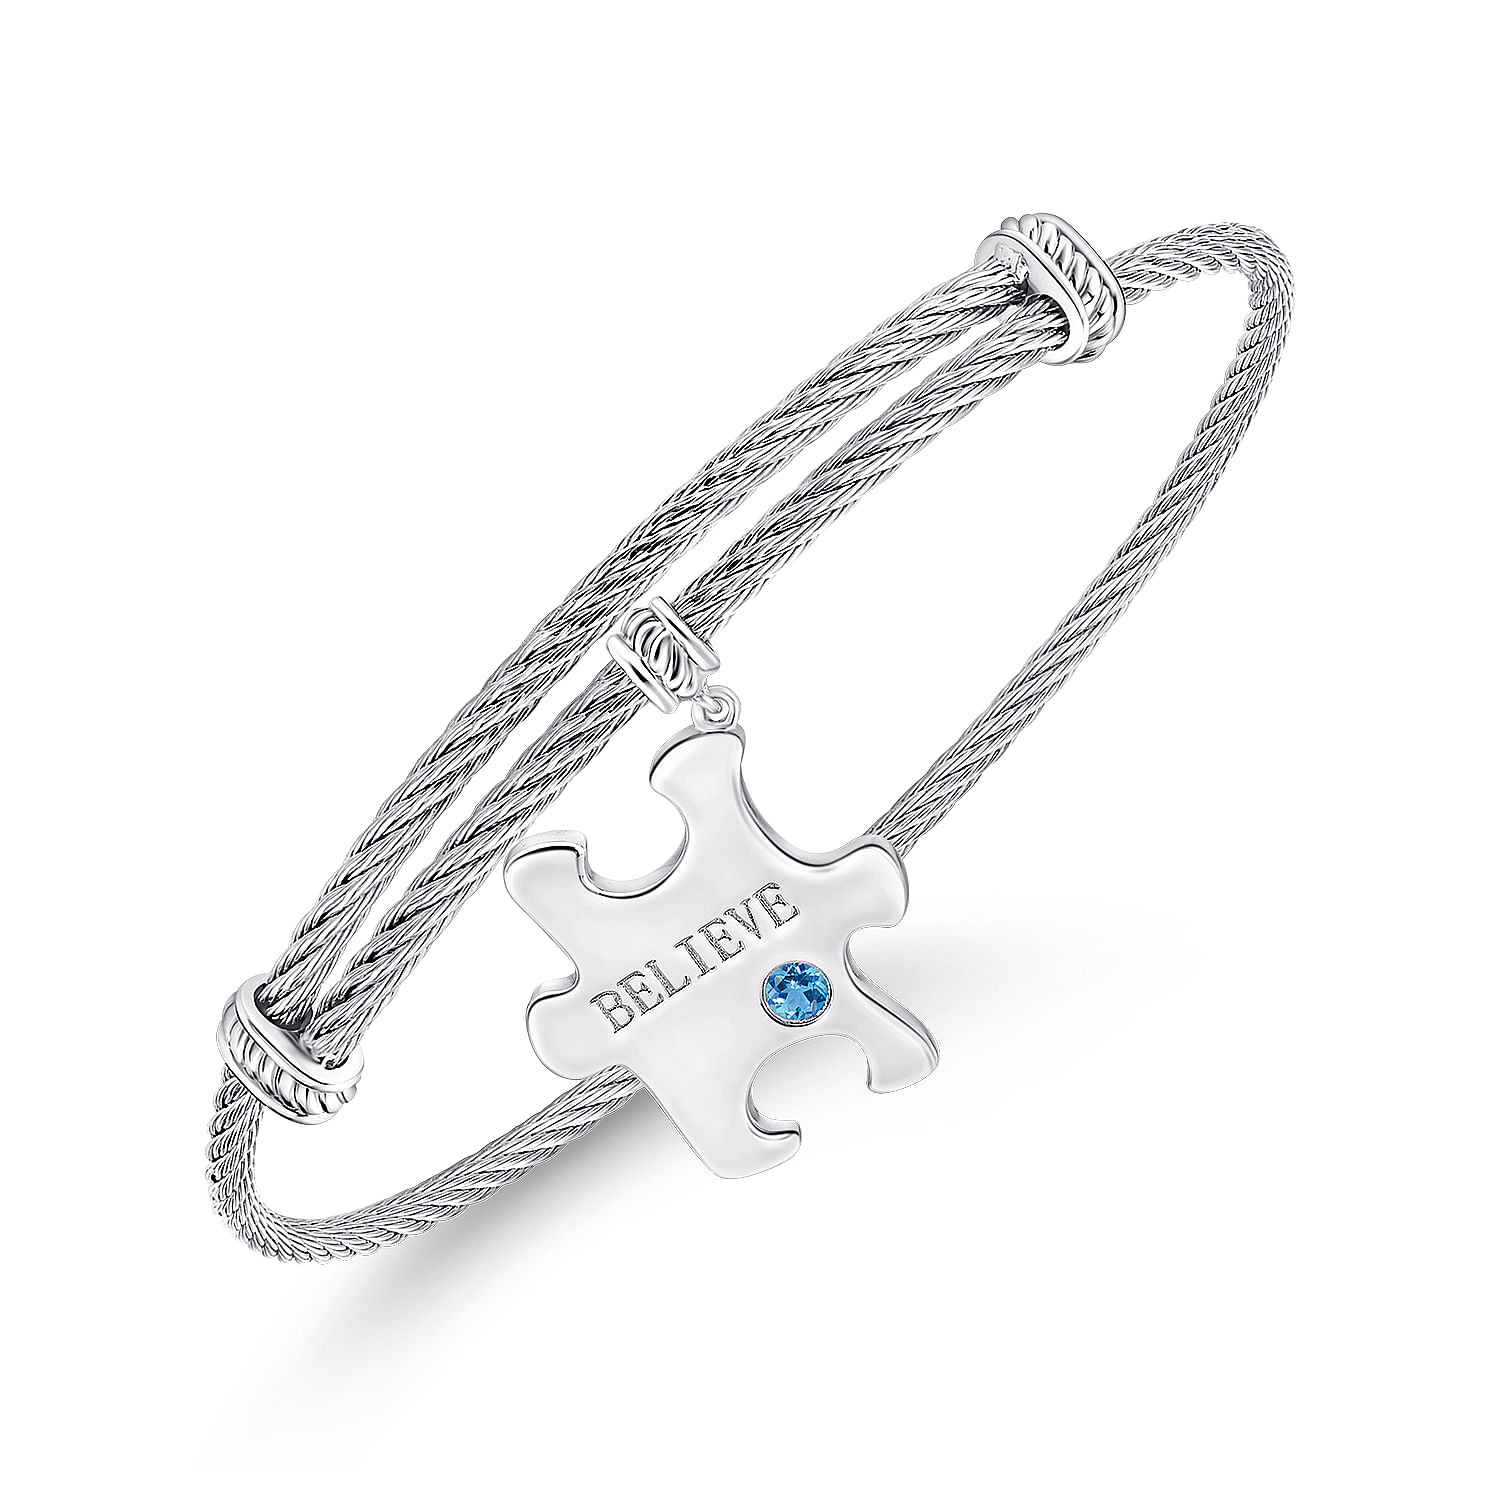 Adjustable Twisted Cable Stainless Steel Bangle with Sterling Silver Blue Topaz Puzzle Piece Charm